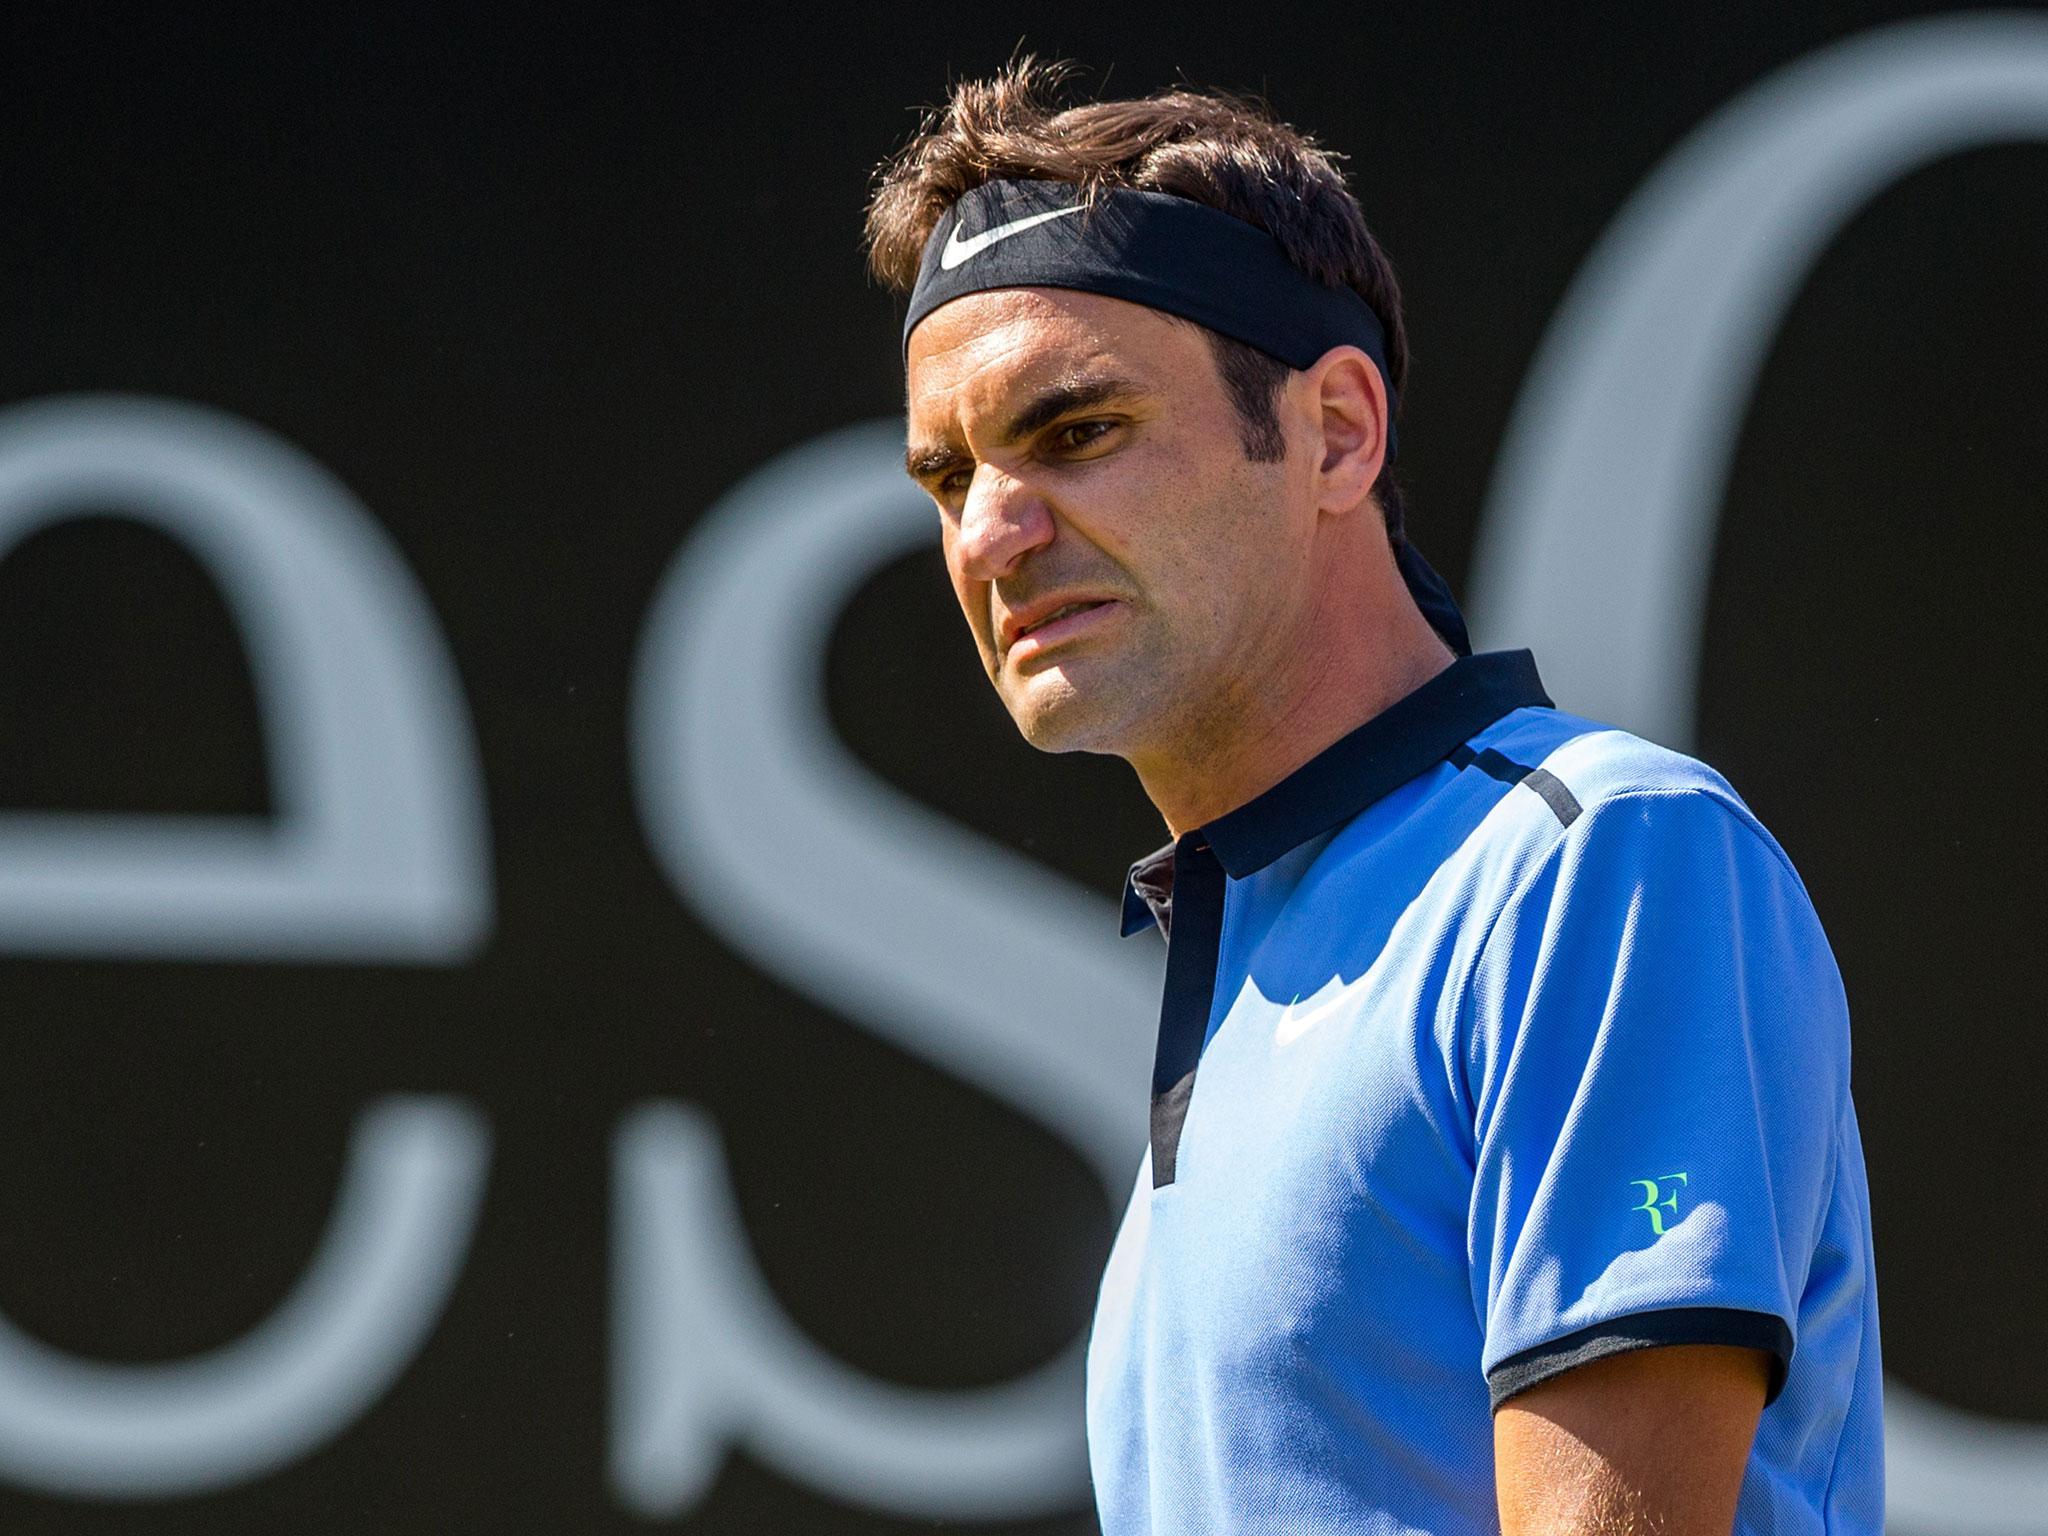 &#13;
Federer also lost his first match on grass this year &#13;